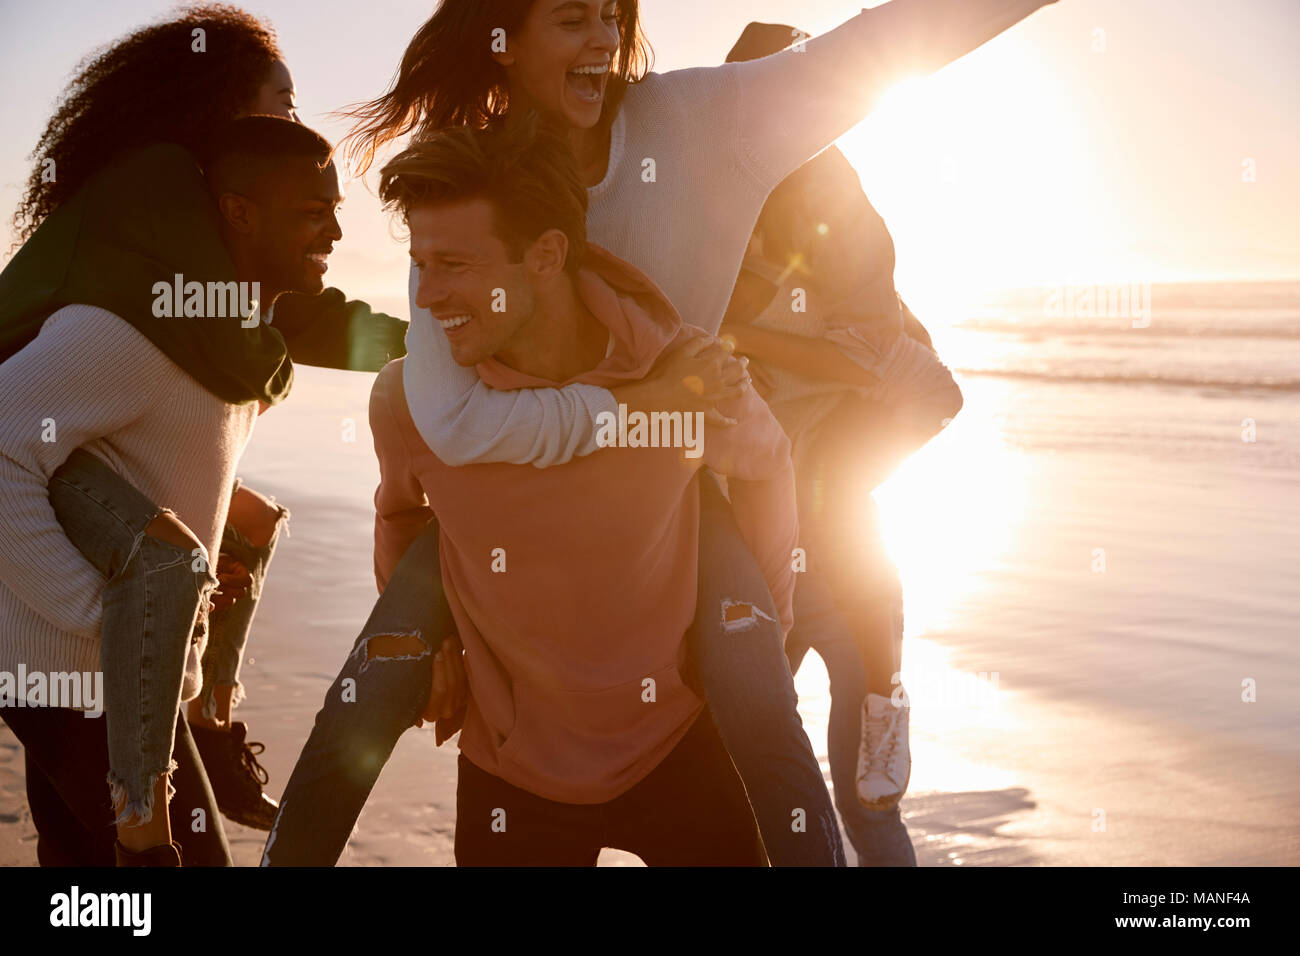 Group Of Friends Having Piggyback Race On Winter Beach Together Stock Photo